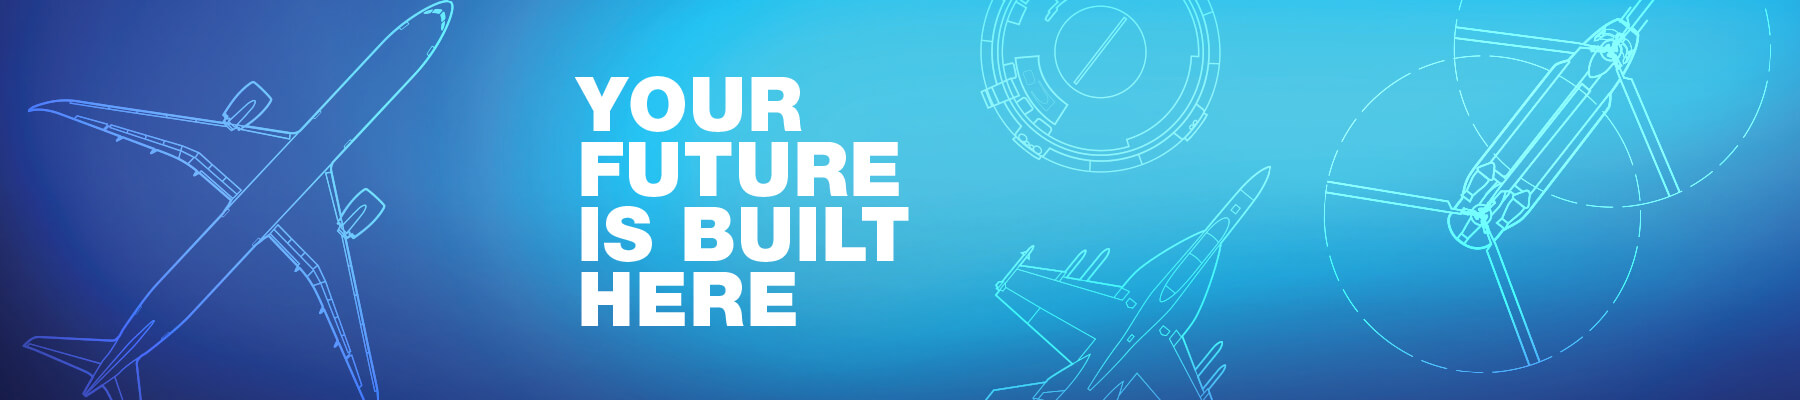 Your Future is Built Here